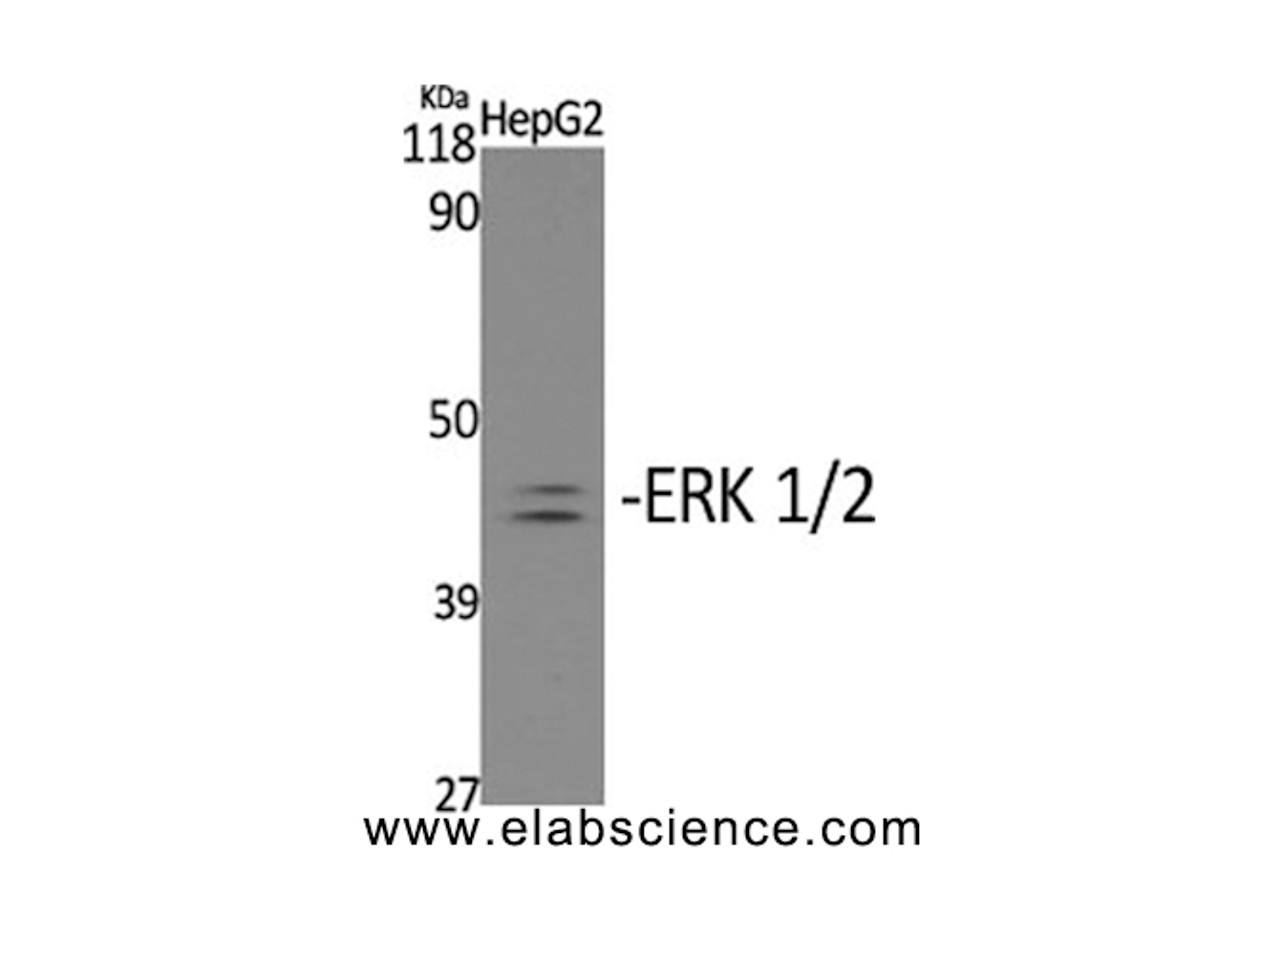 Western Blot analysis of HepG2 cells with Phospho-ERK 1/2 (Tyr204) Polyclonal Antibody at dilution of 1:2000